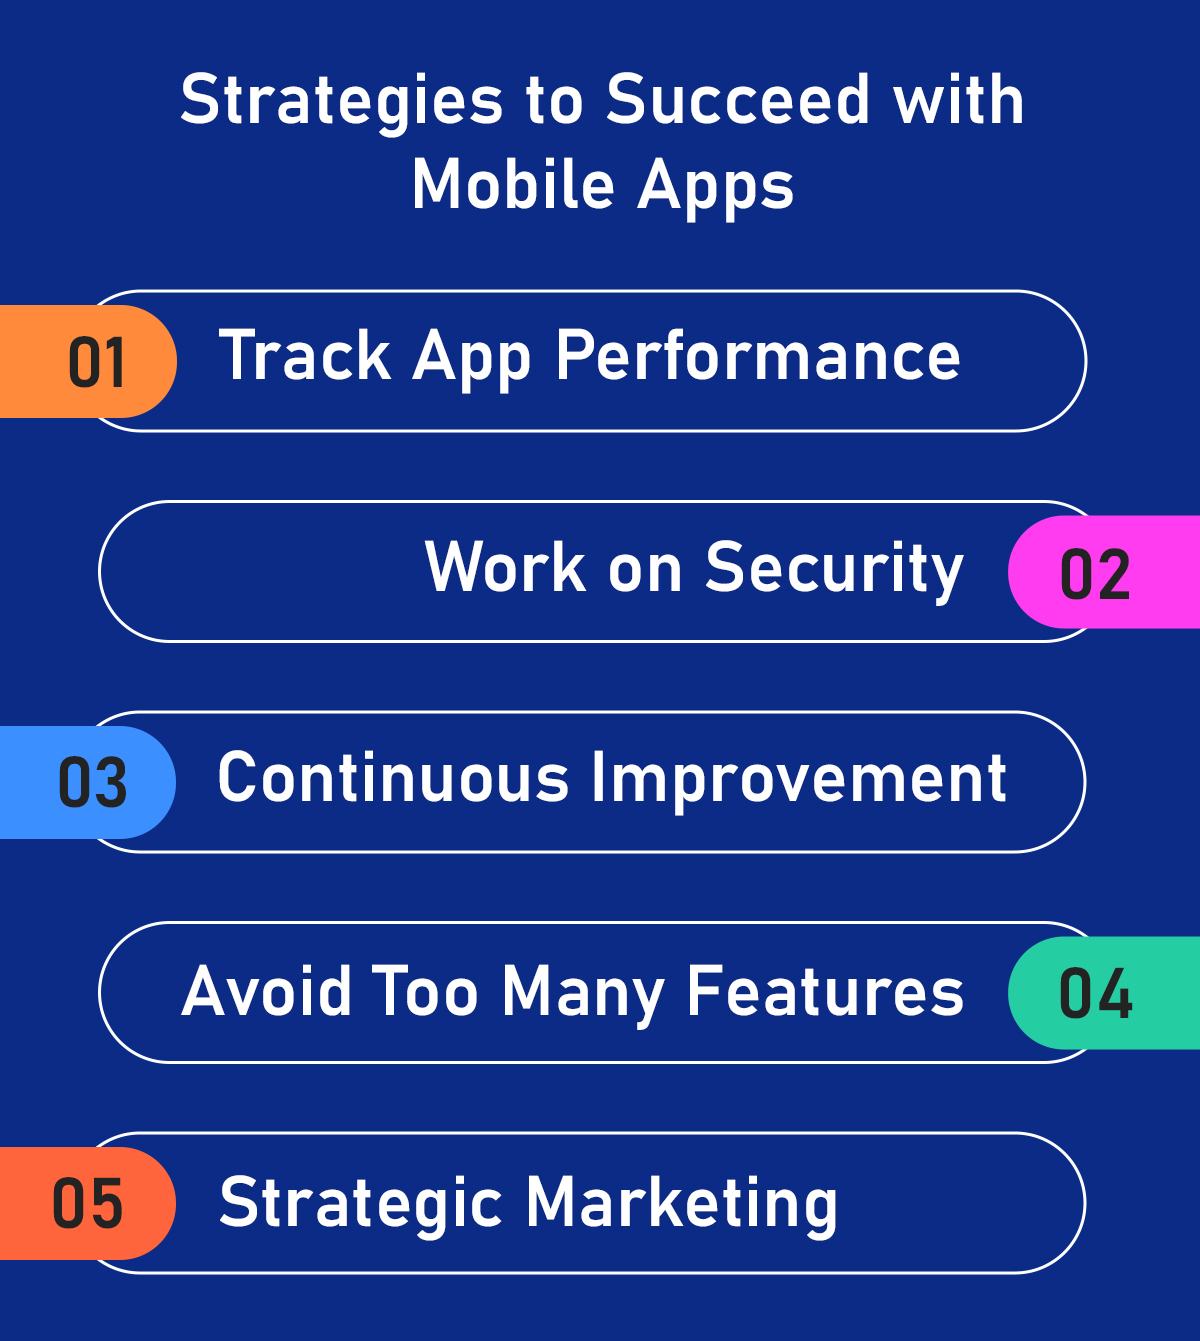 Strategies to Succeed with Mobile Apps